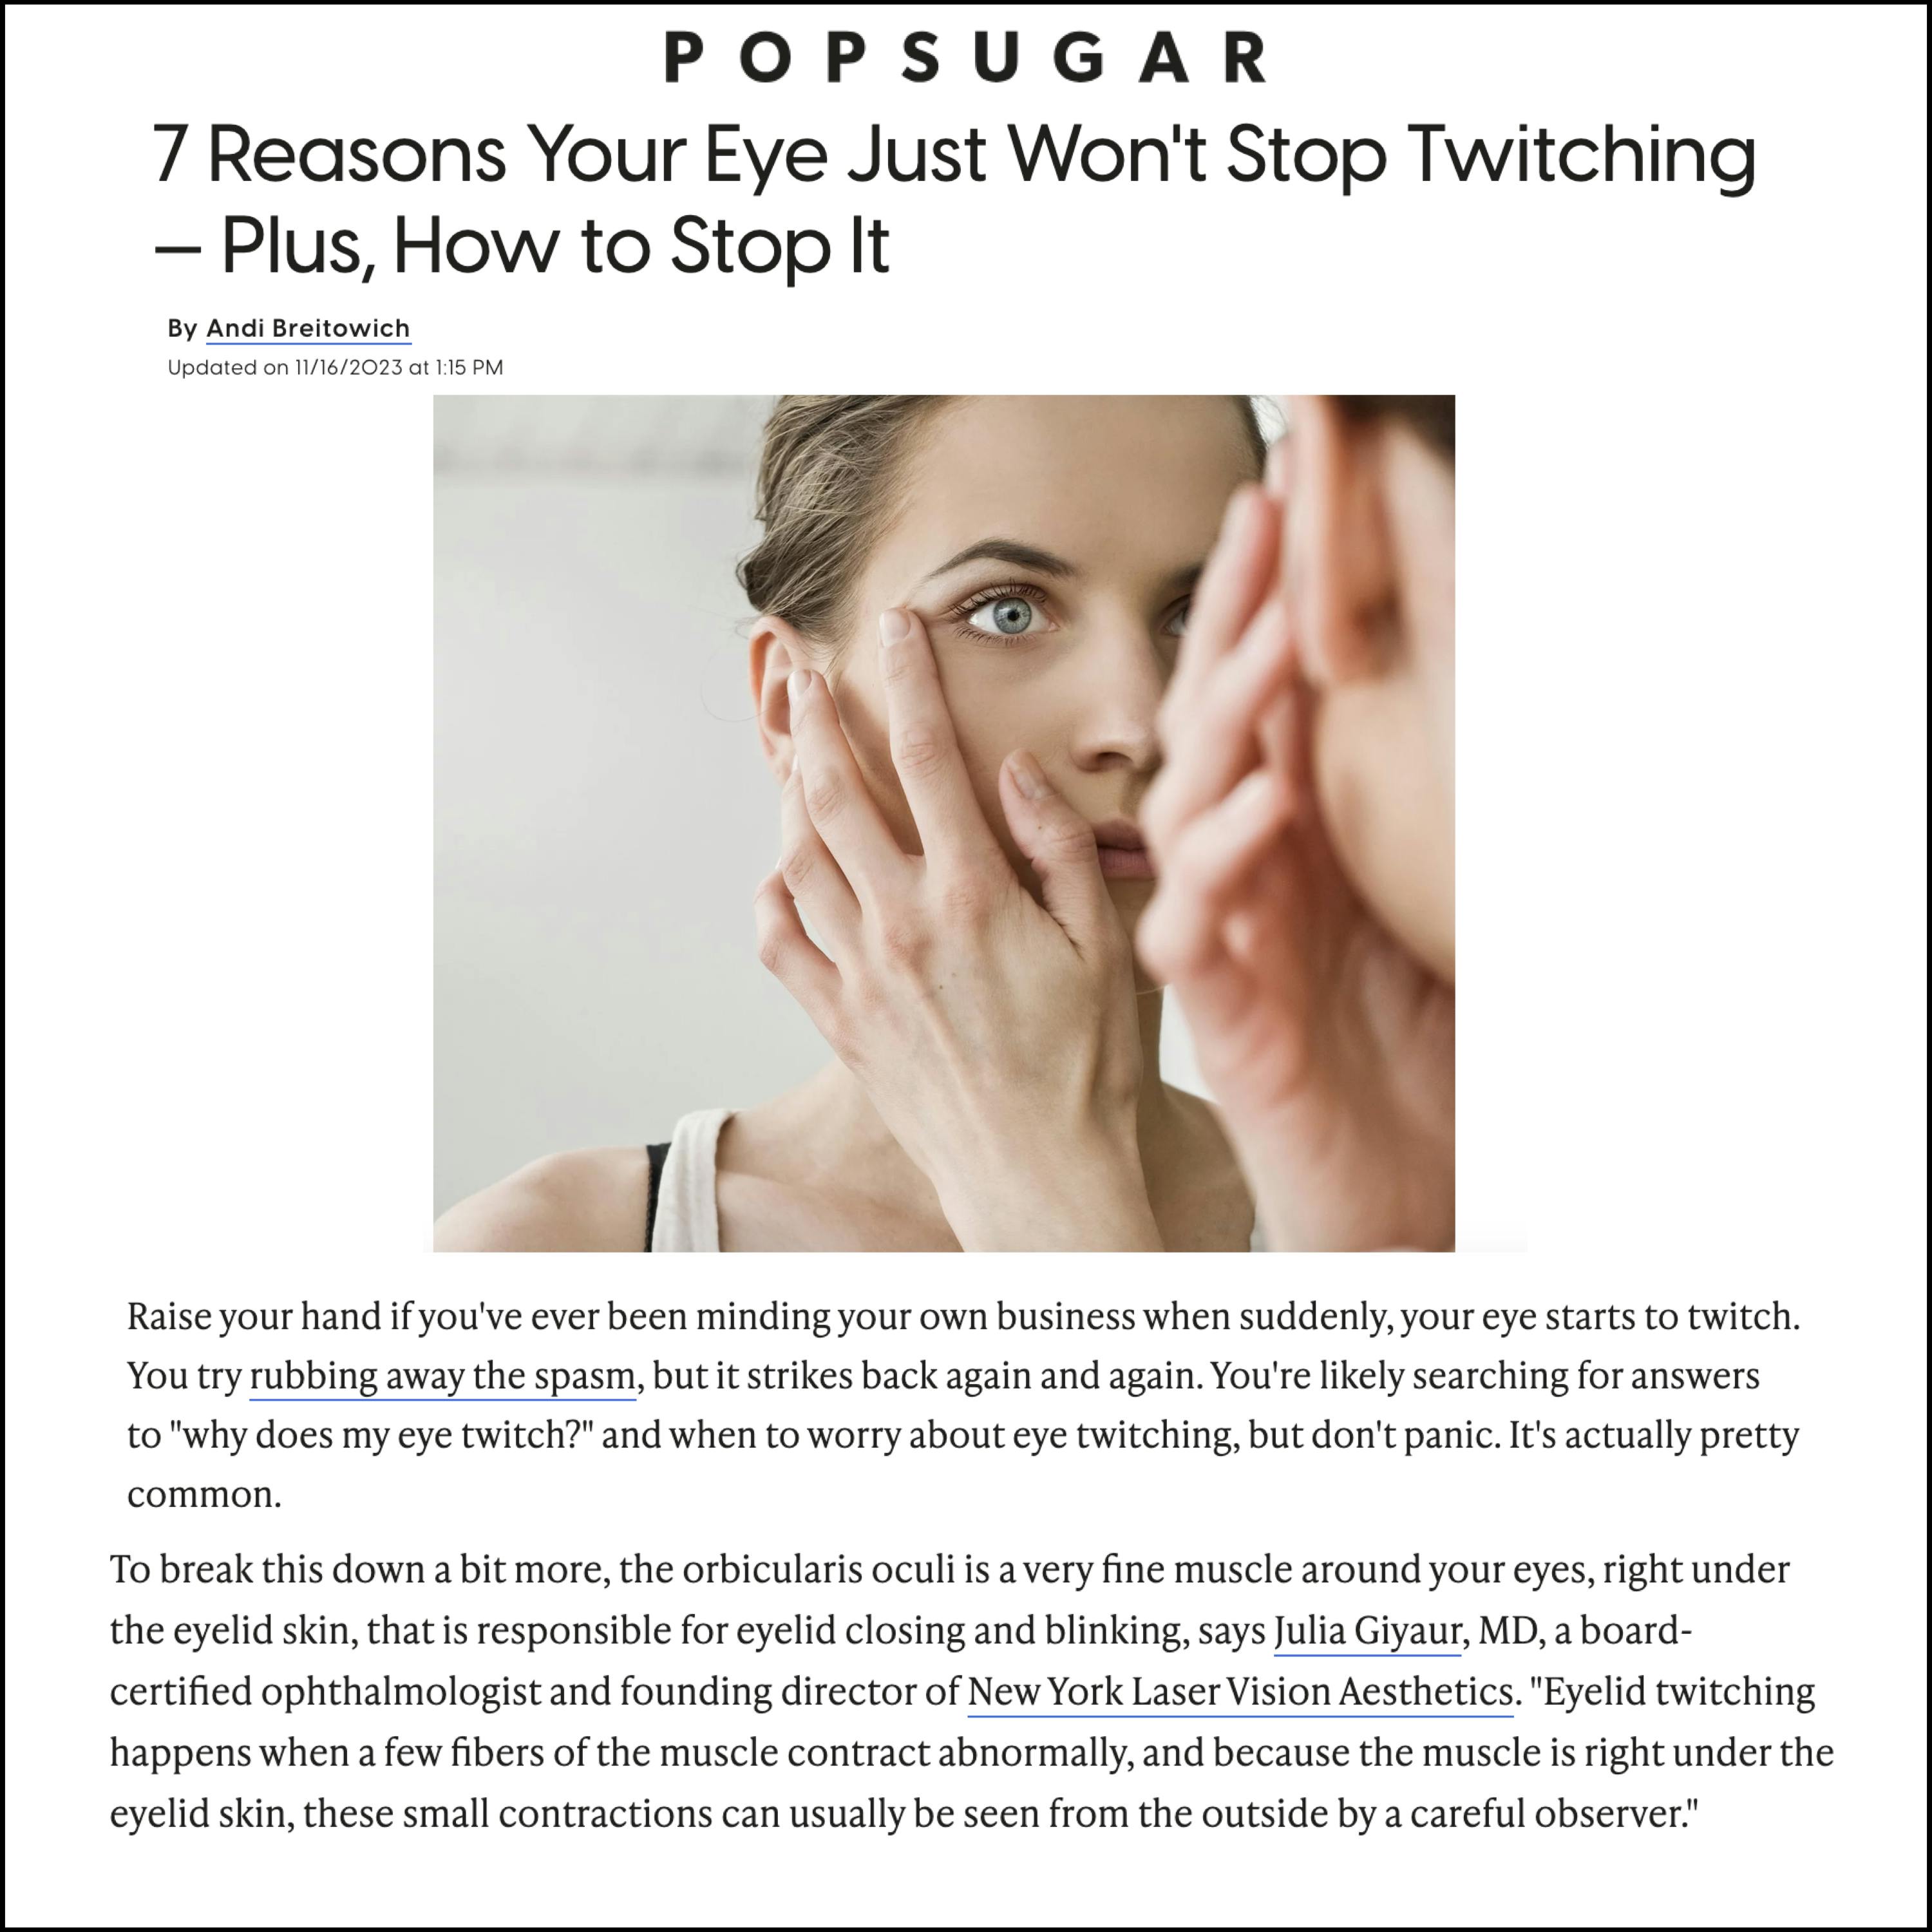 Feature with Dr. Giyaur: 7 Reasons Your Eye Just Won't Stop Twitching - Plus, How to Stop It